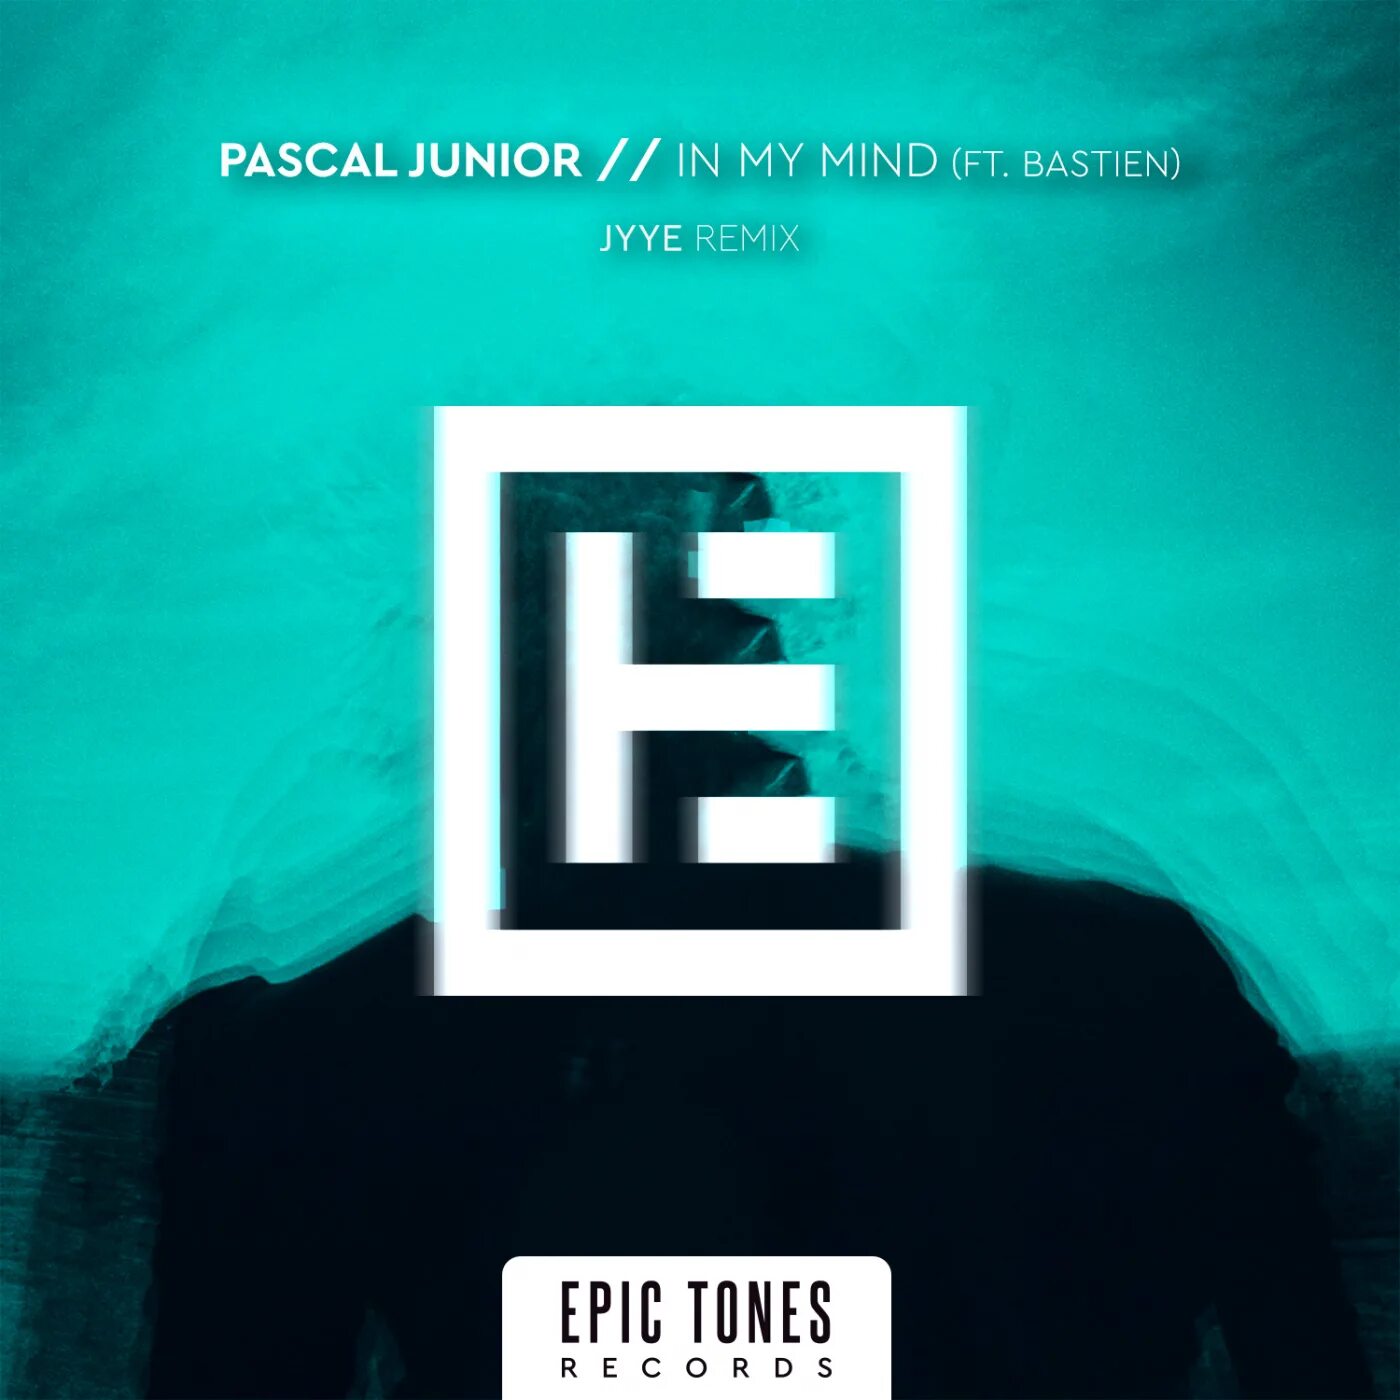 Pascal Junior. Pascal Junior, hot Pixels - feel you closer. Pascal Junior - in my Dreams. In my Mind. Pascal remix